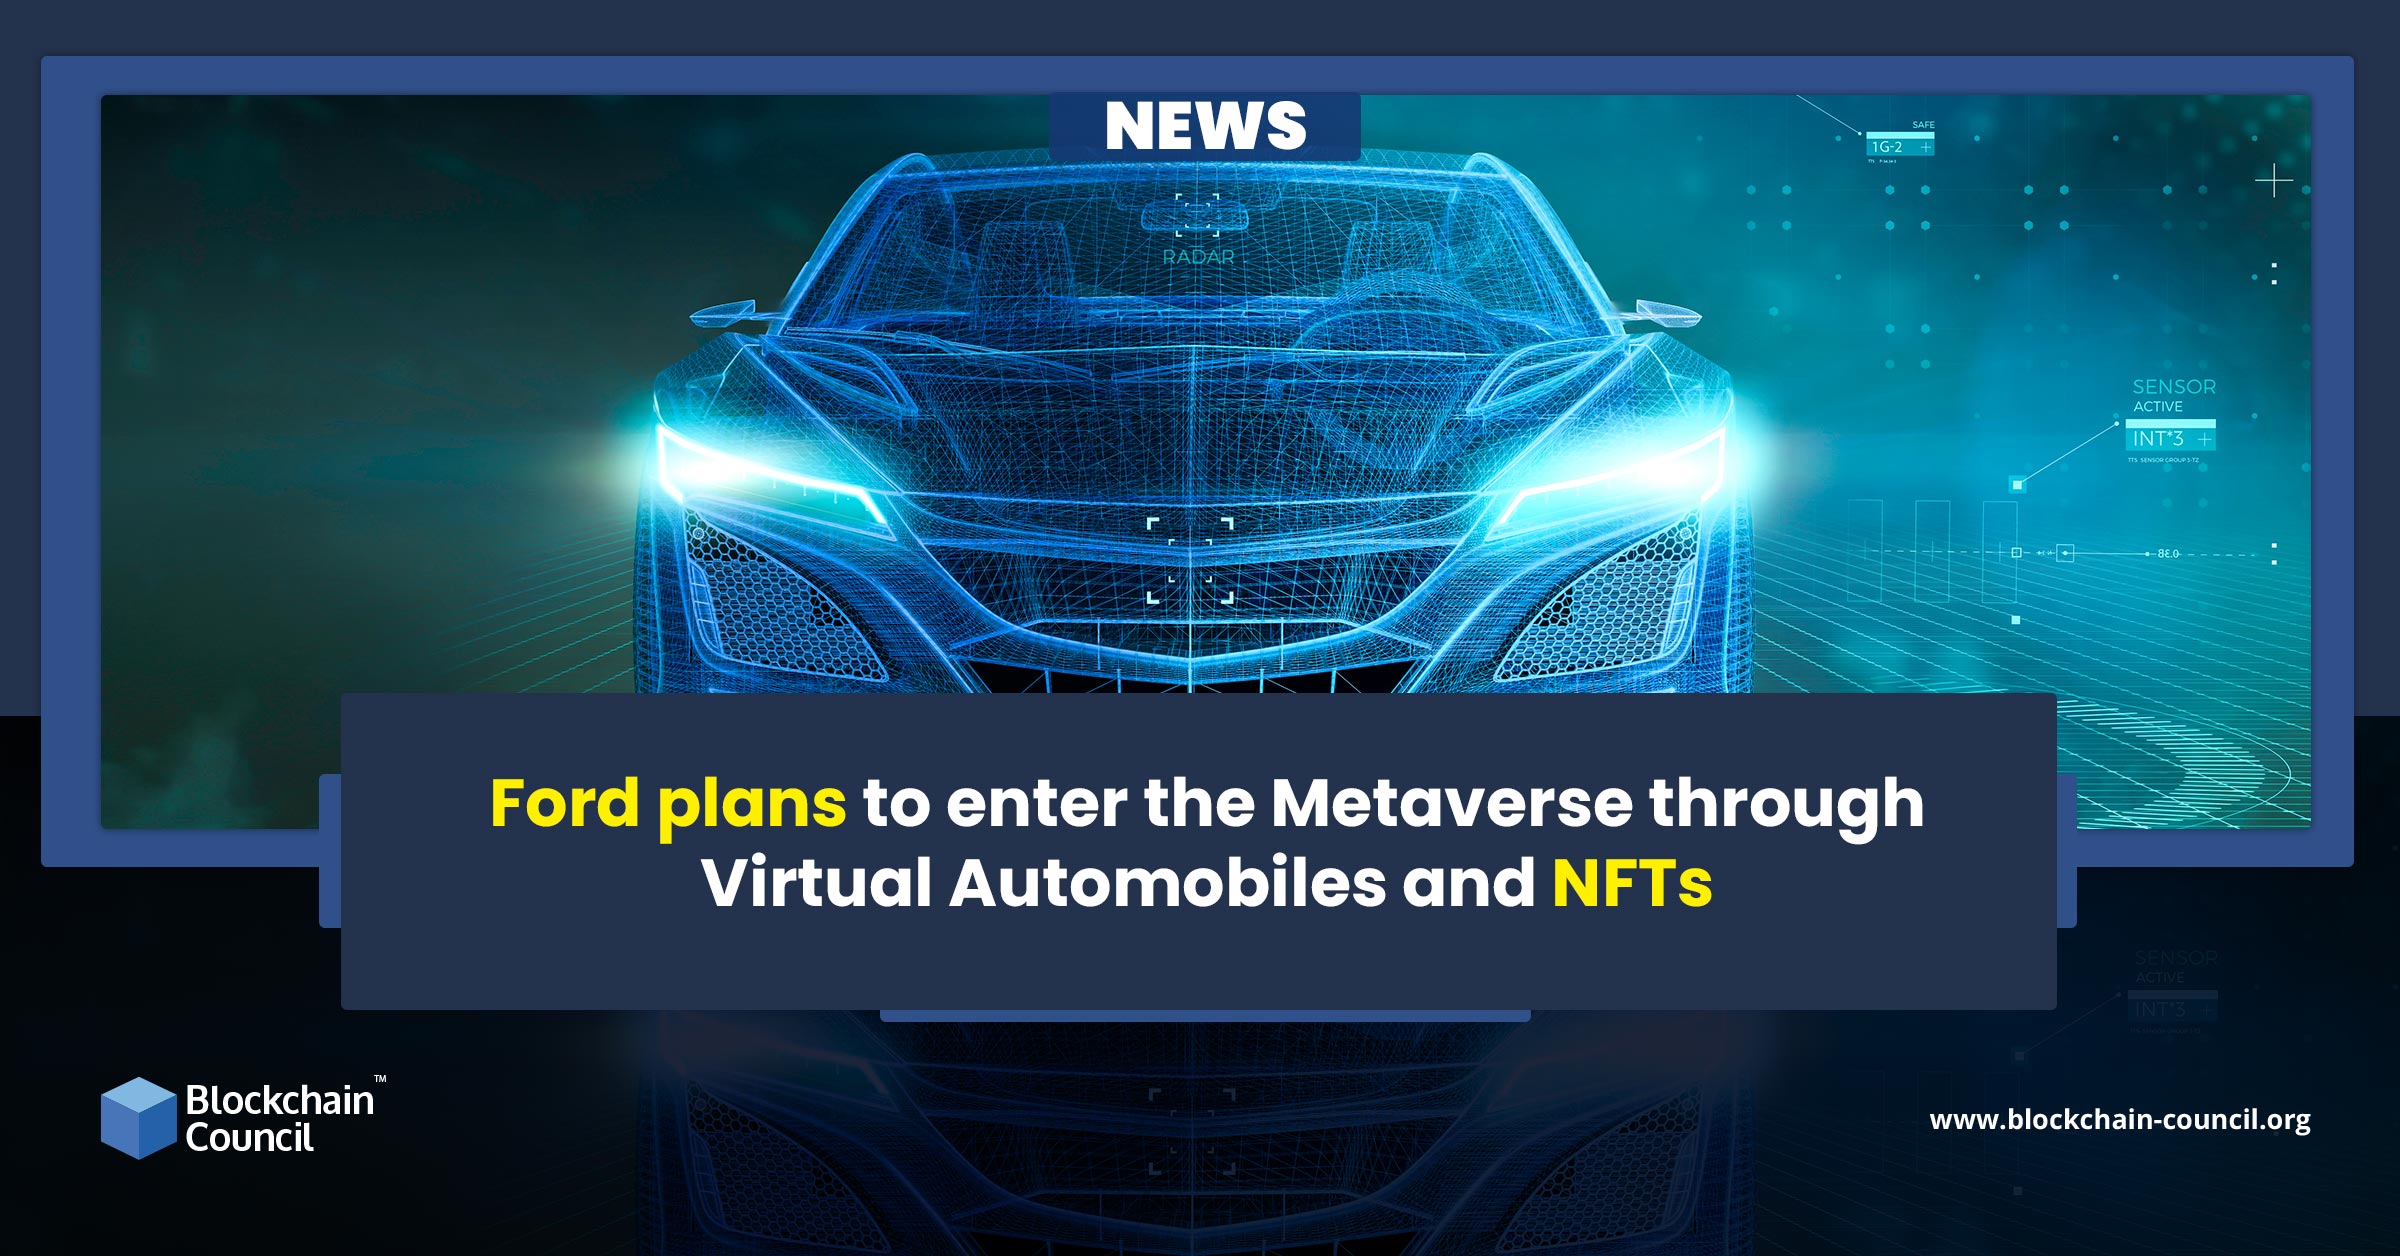 Ford plans to enter the Metaverse through Virtual Automobiles and NFTs